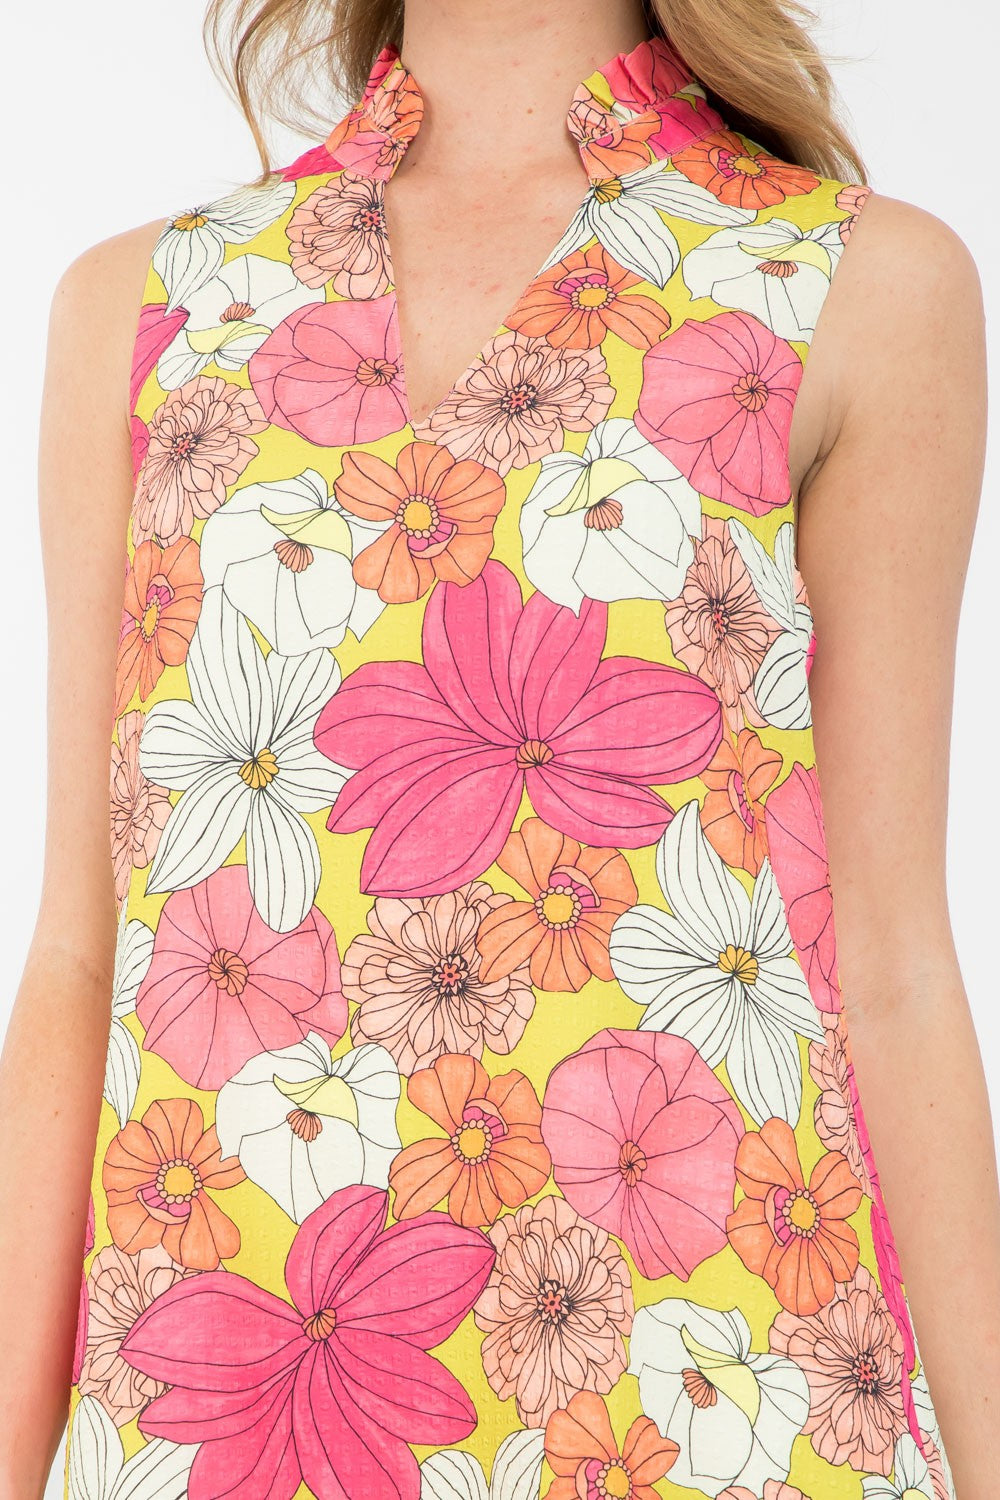 Blossoming With Joy Dress